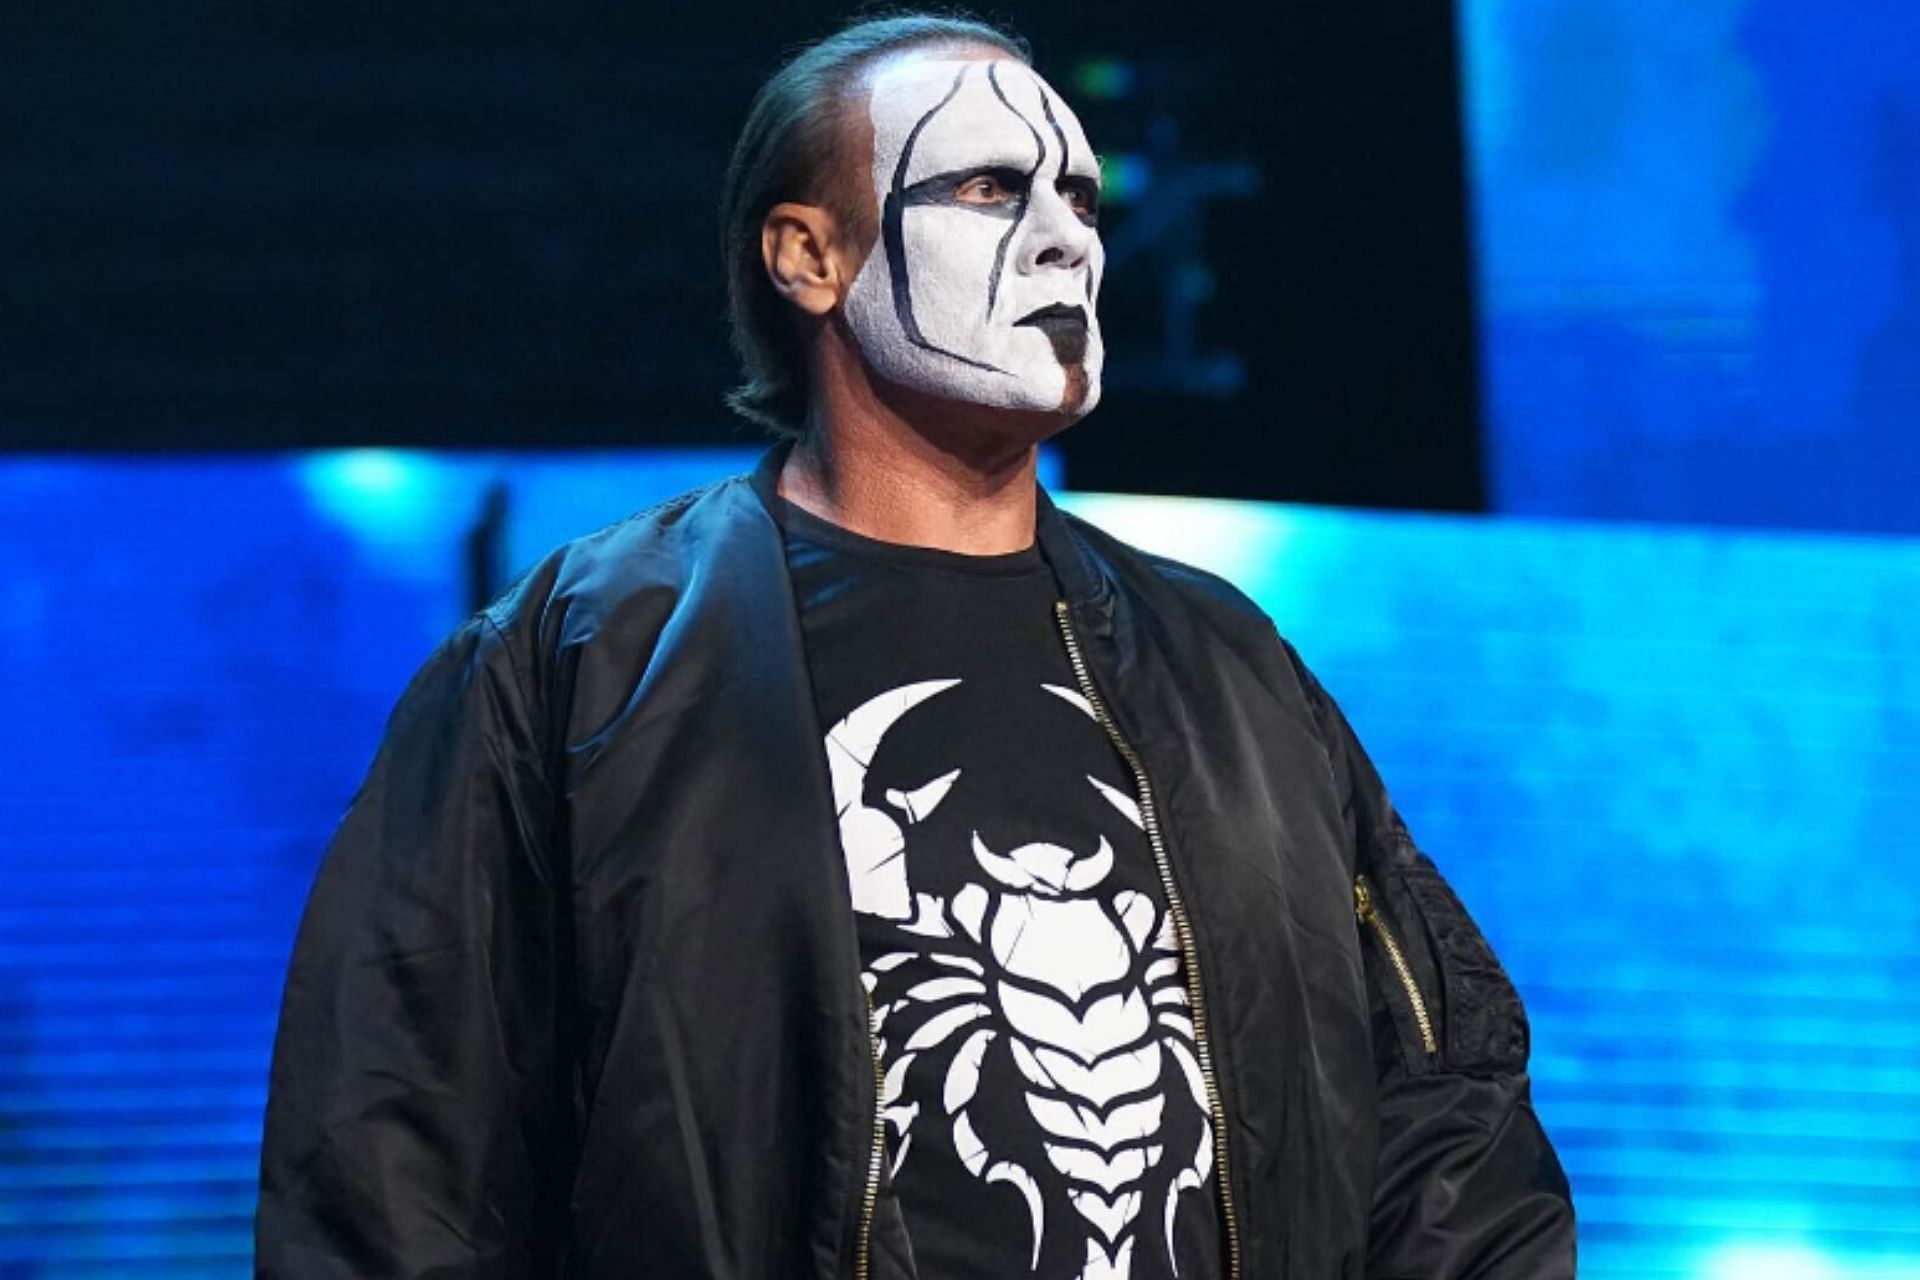 New details about Sting